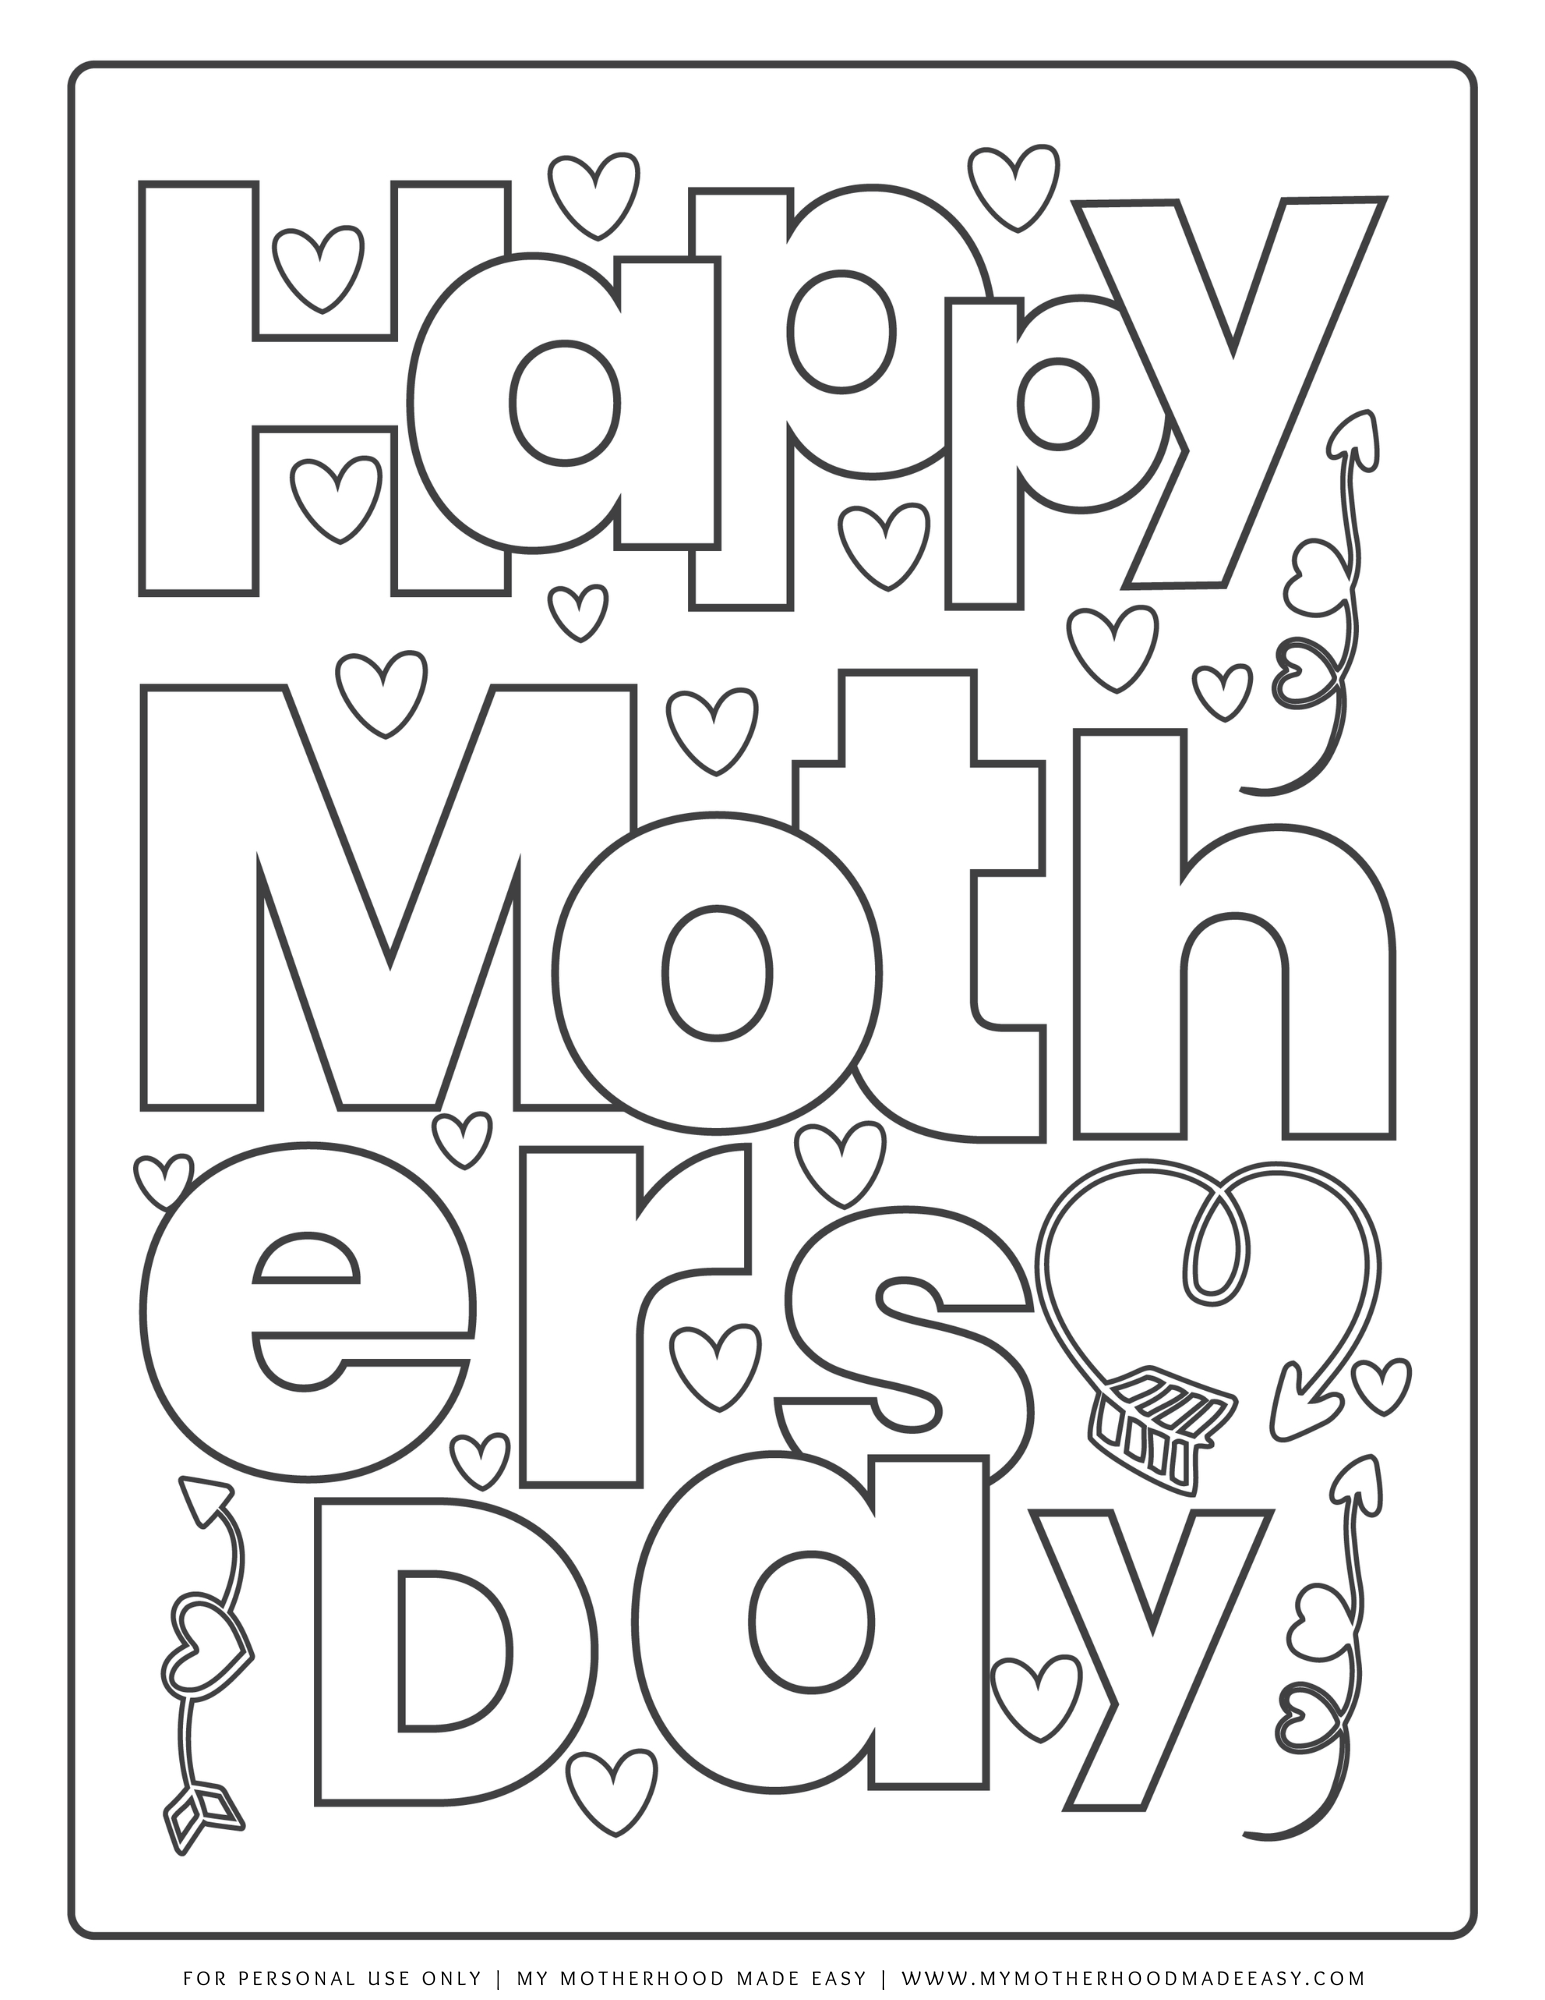 Mother’s day coloring pages